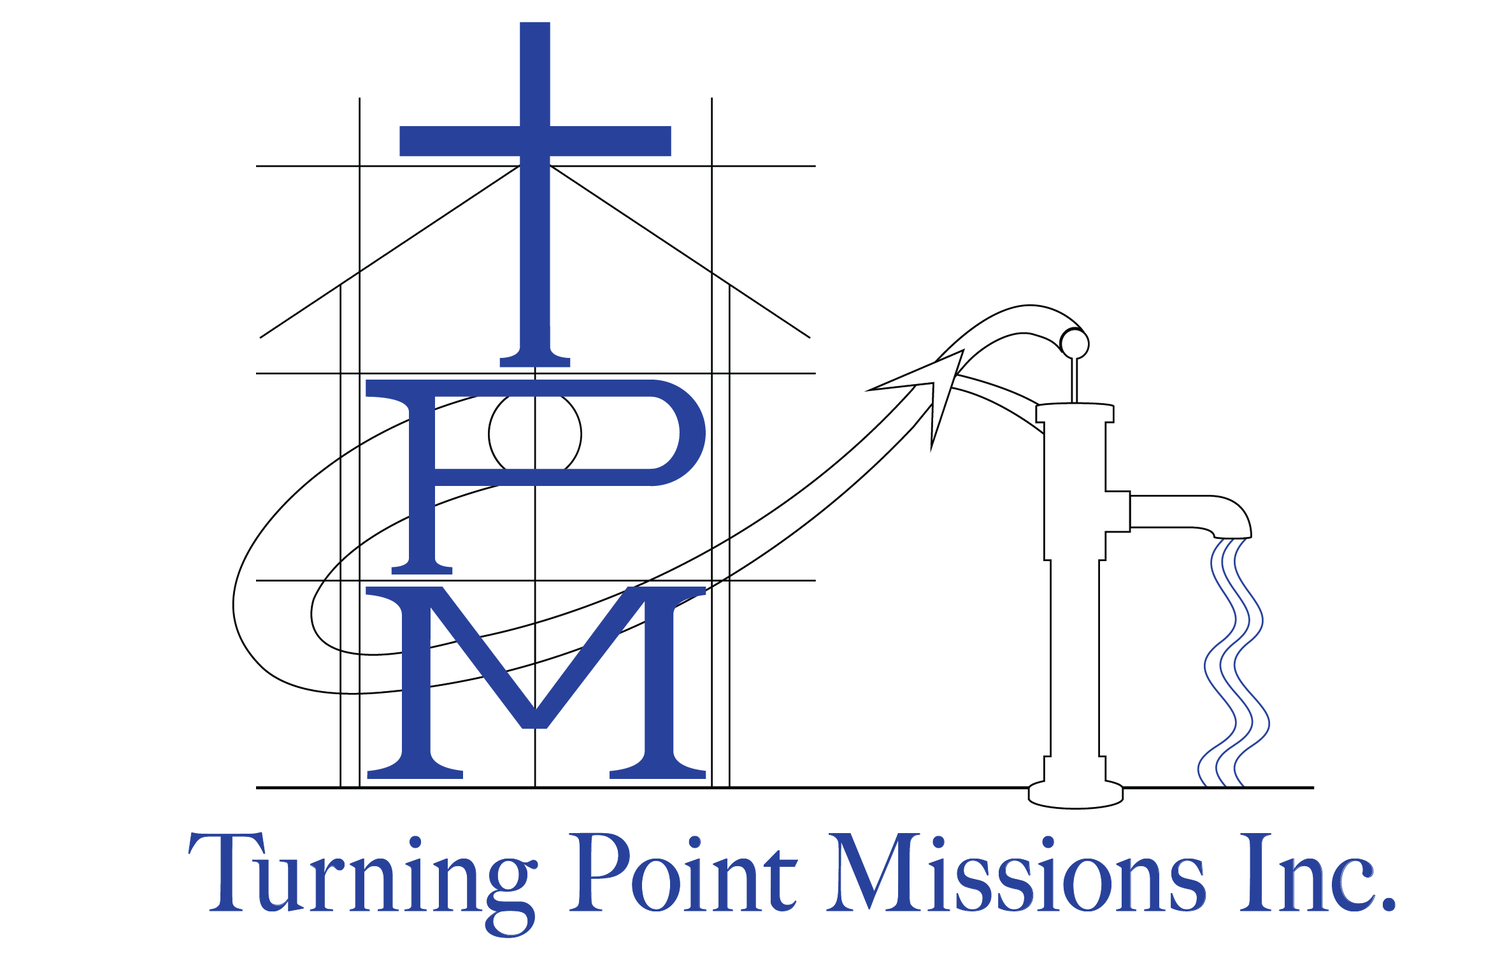 Turning Point Missions, Inc